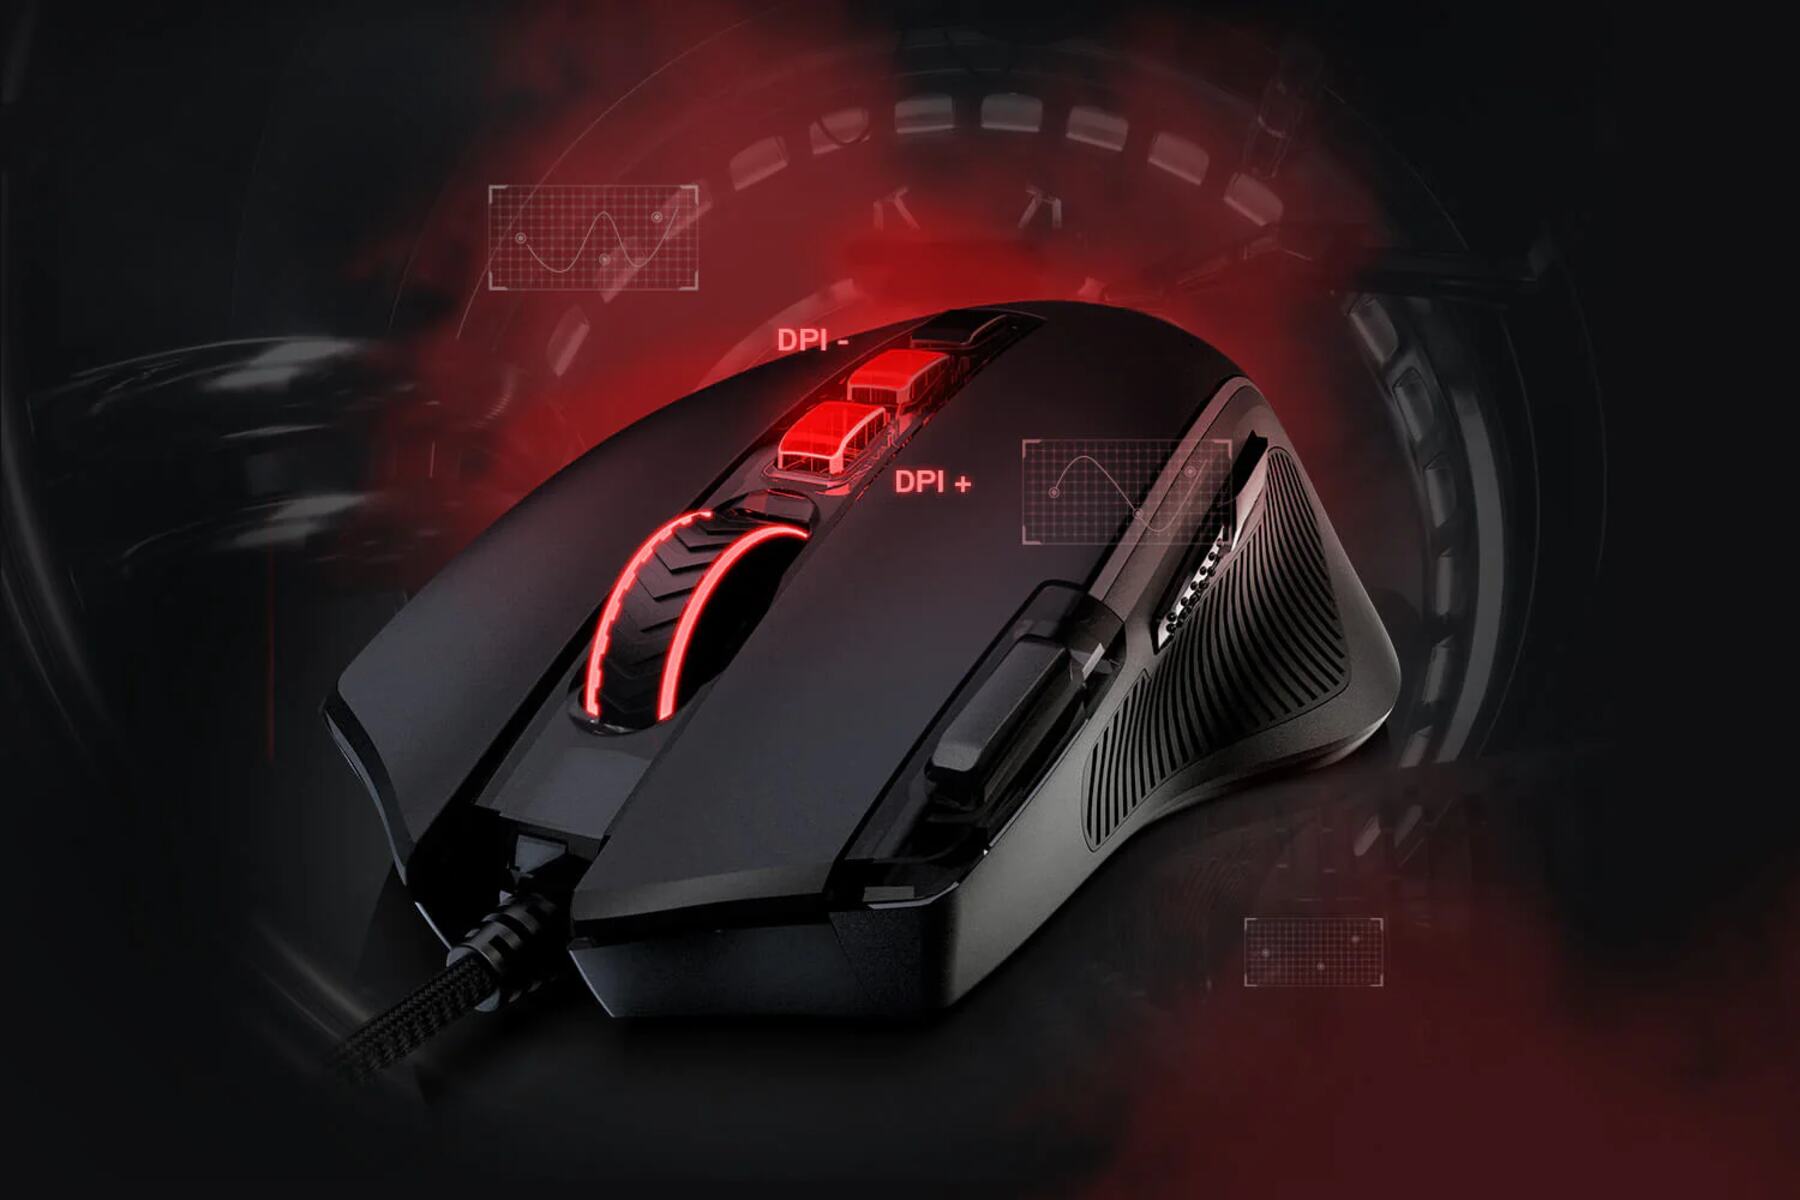 redragon-max-2000dpi-adjustable-6d-optical-usb-wired-gaming-mouse-how-to-switch-dpi